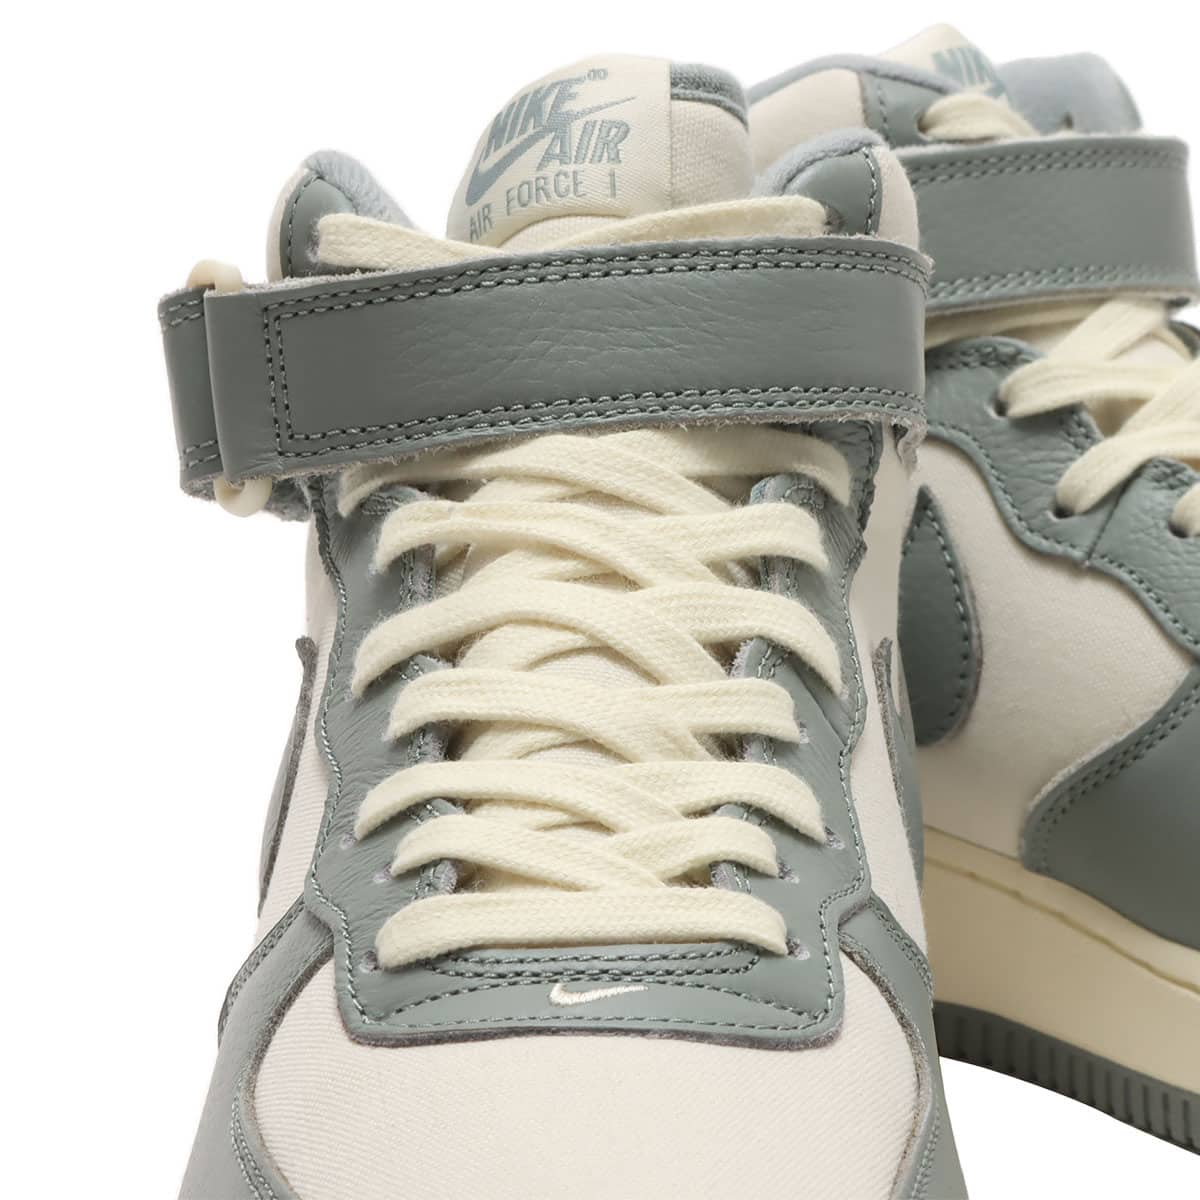 SneakerFits on X: Nike Air Force 1 Mid '07 LX NBHD “Mica Green/Coconut  Milk” + Outfits to Match:    / X